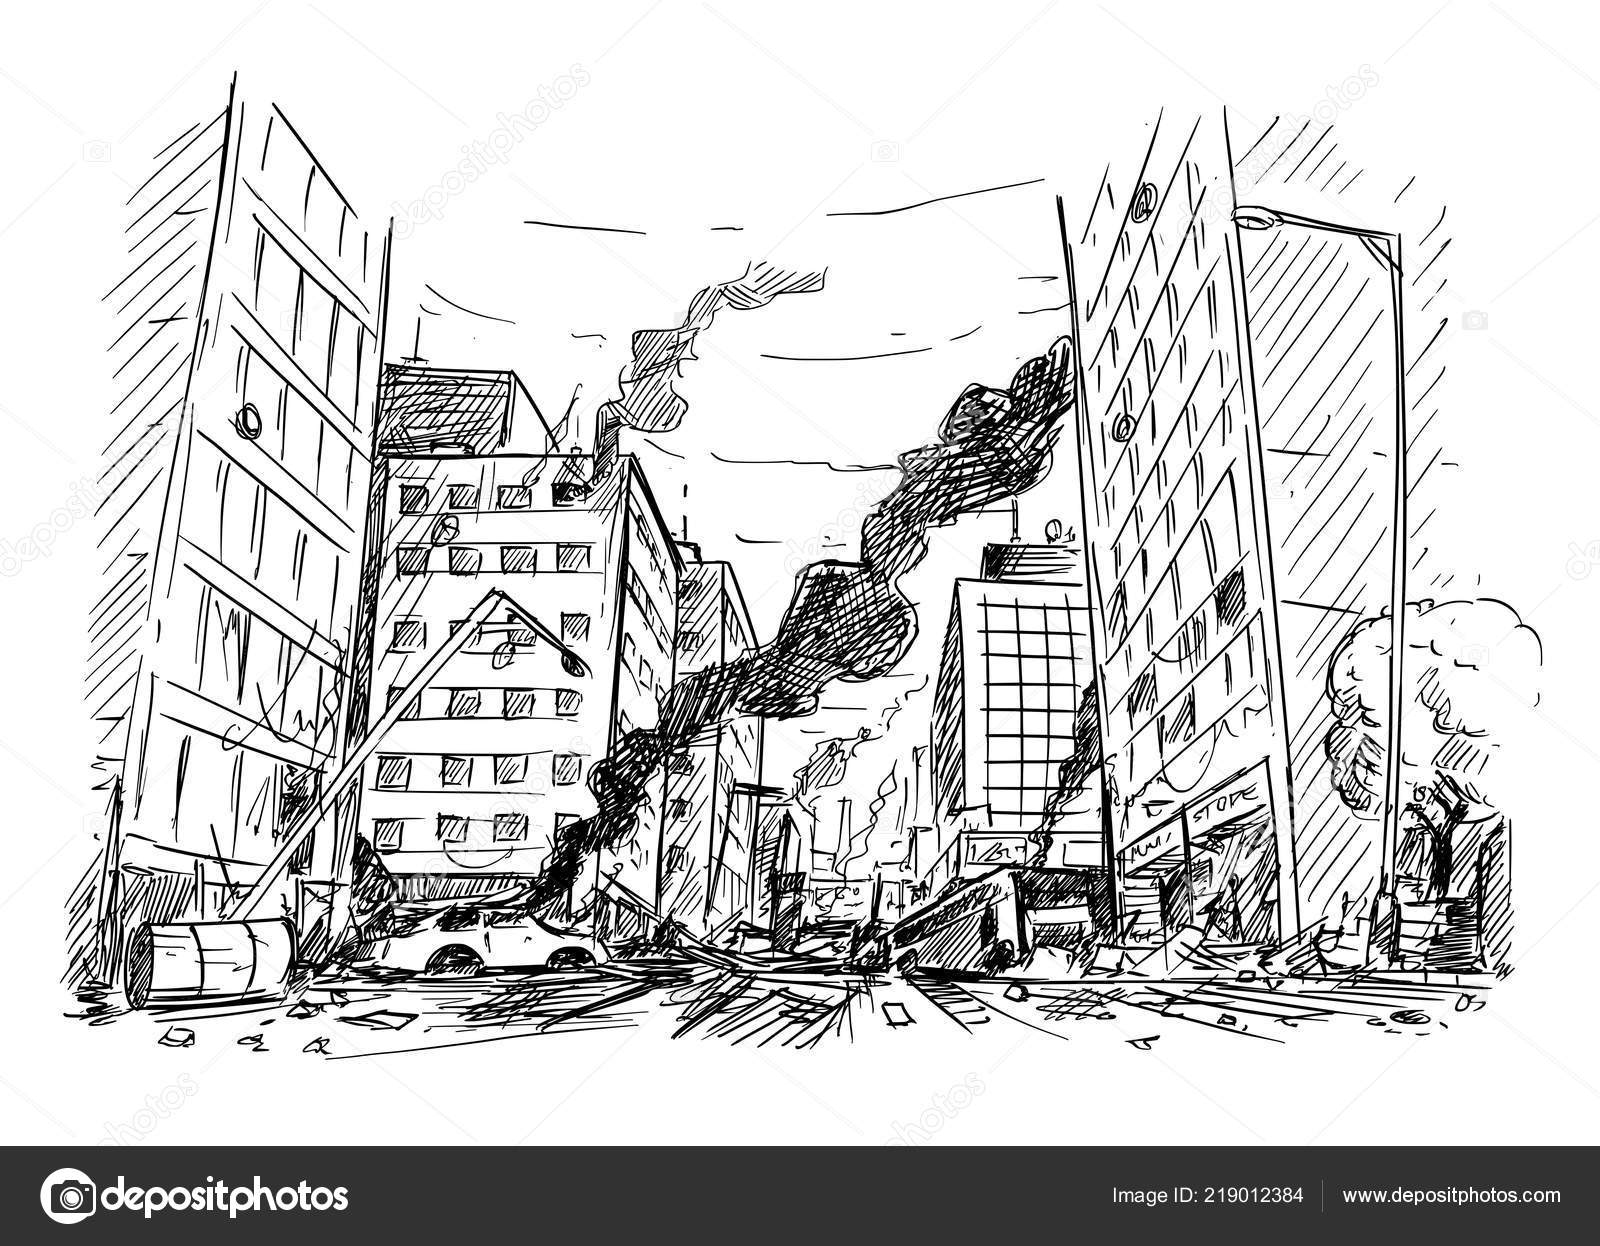 Destroyed City Drawing Hand Drawing Of City Street Destroyed By War Or Riot Or Disaster Stock Vector C Ursus Zdeneksasek Com